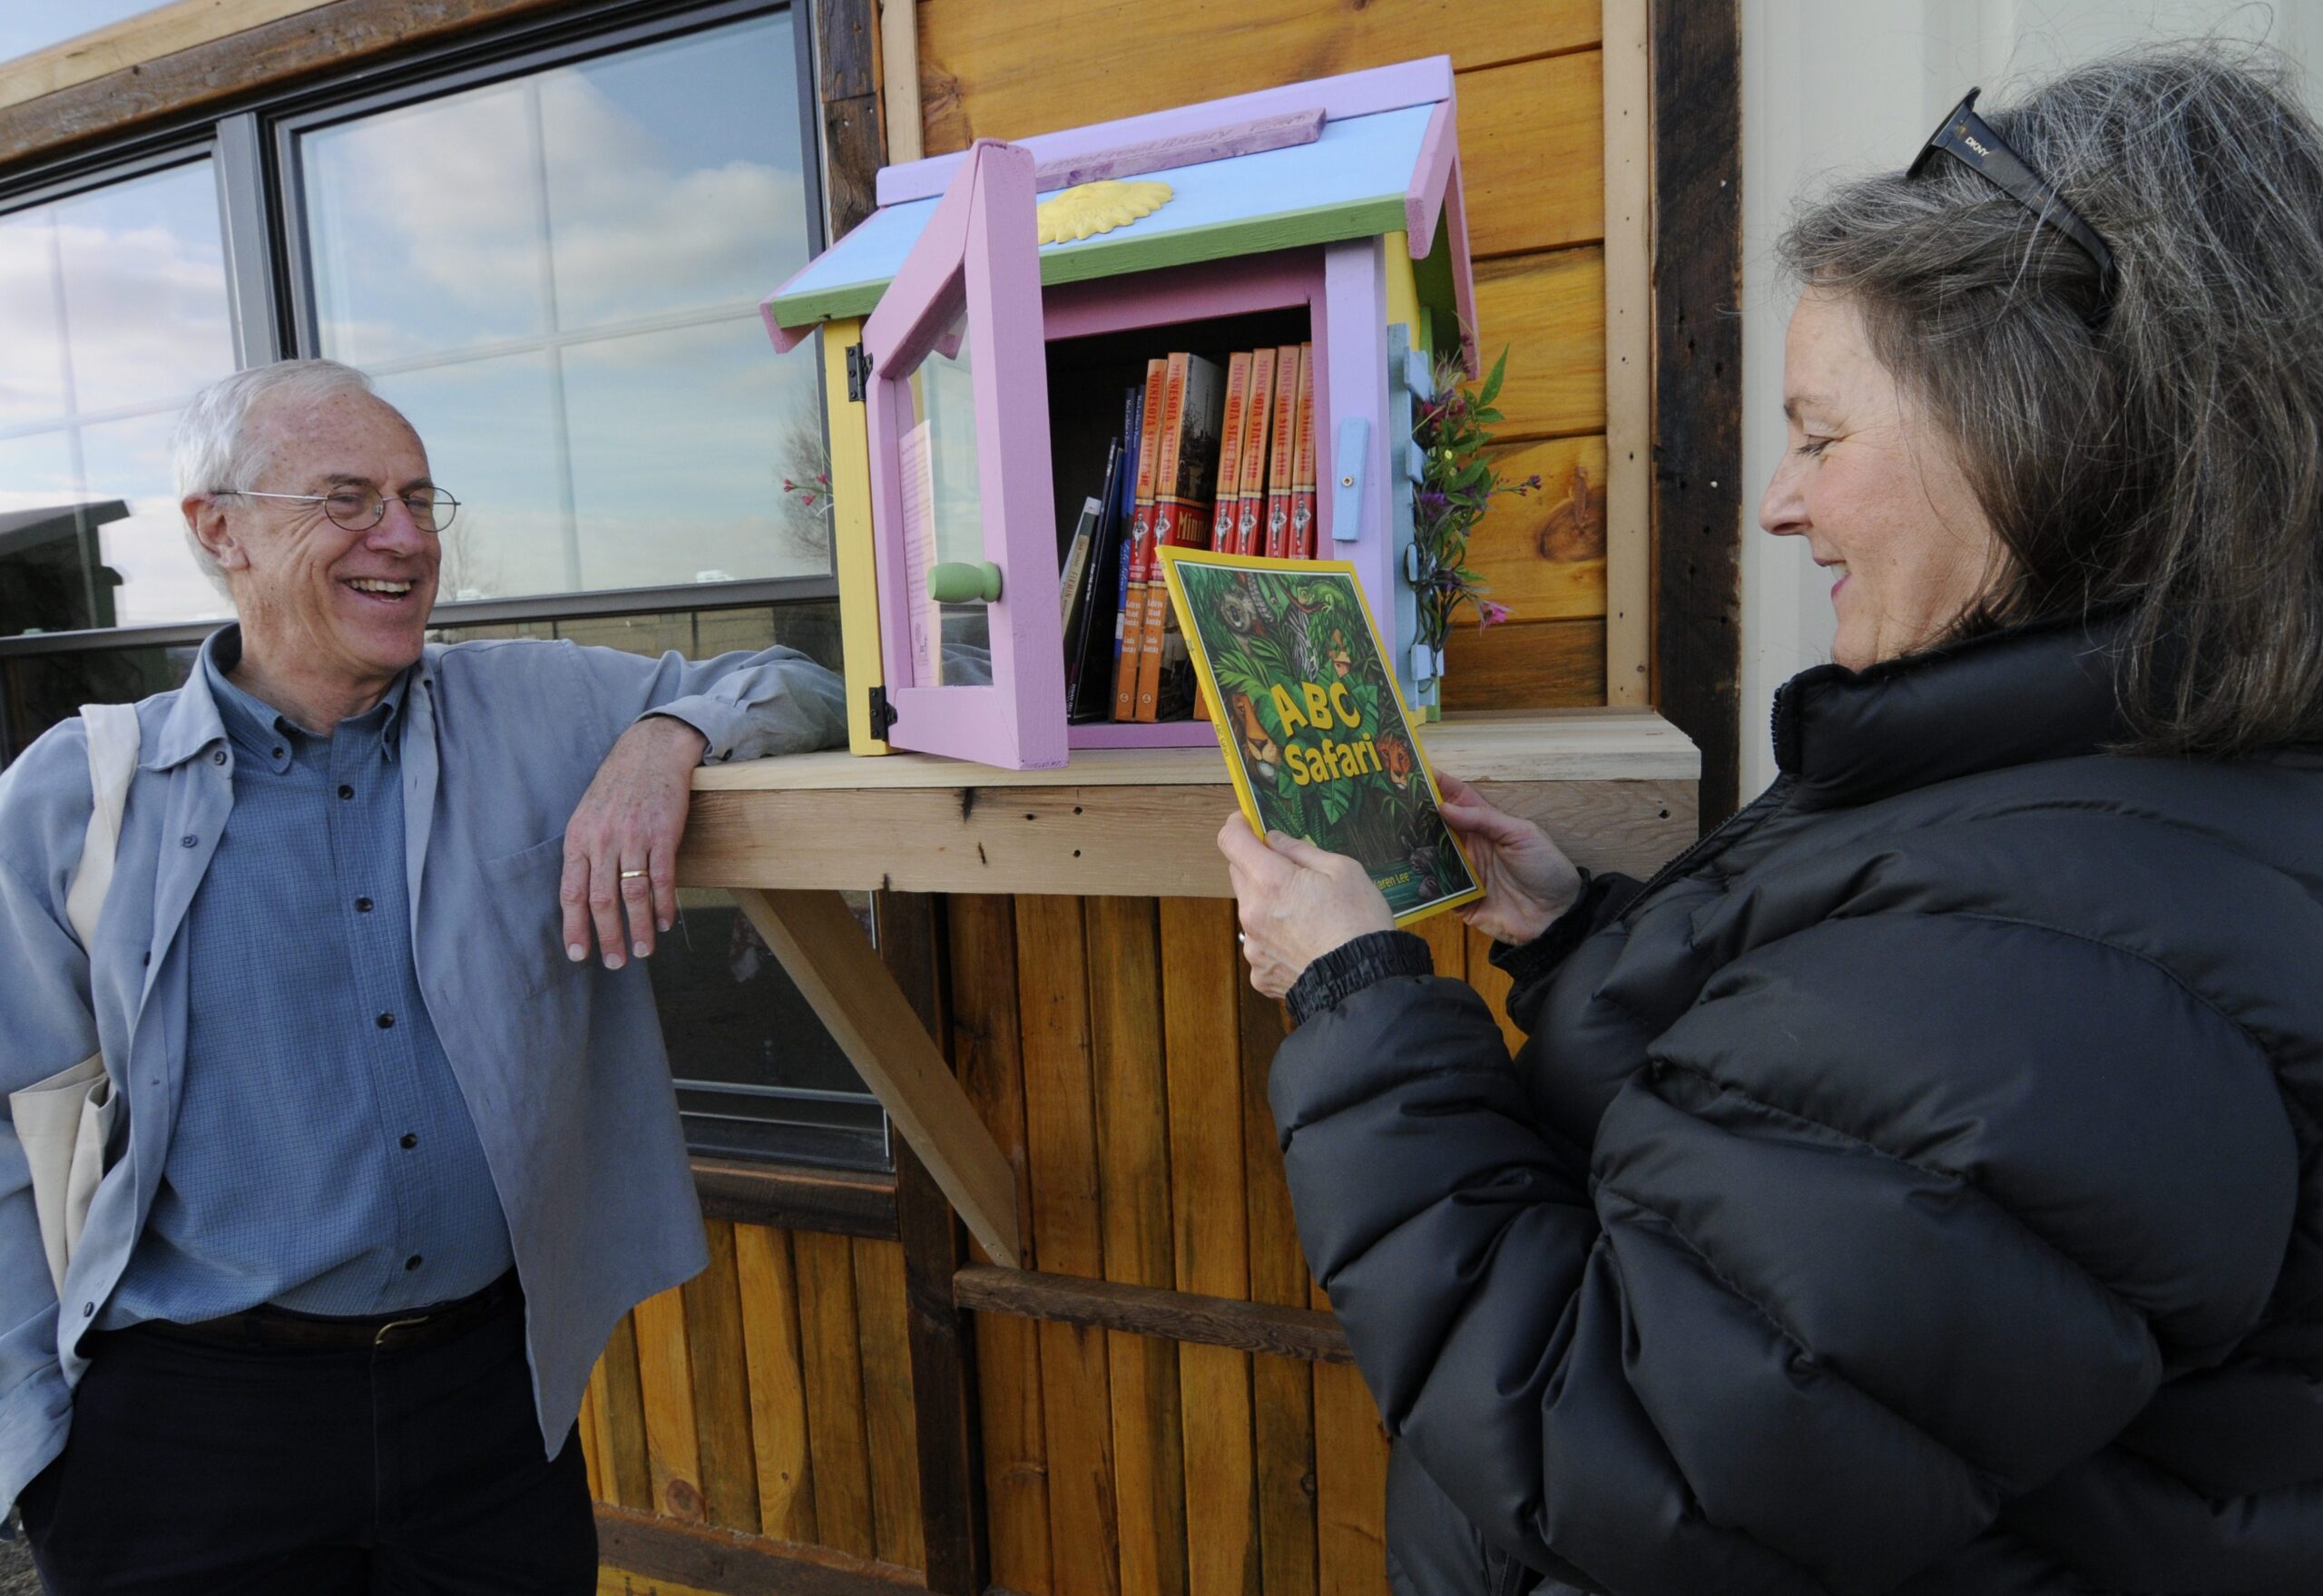 Two people making selections from a little free library